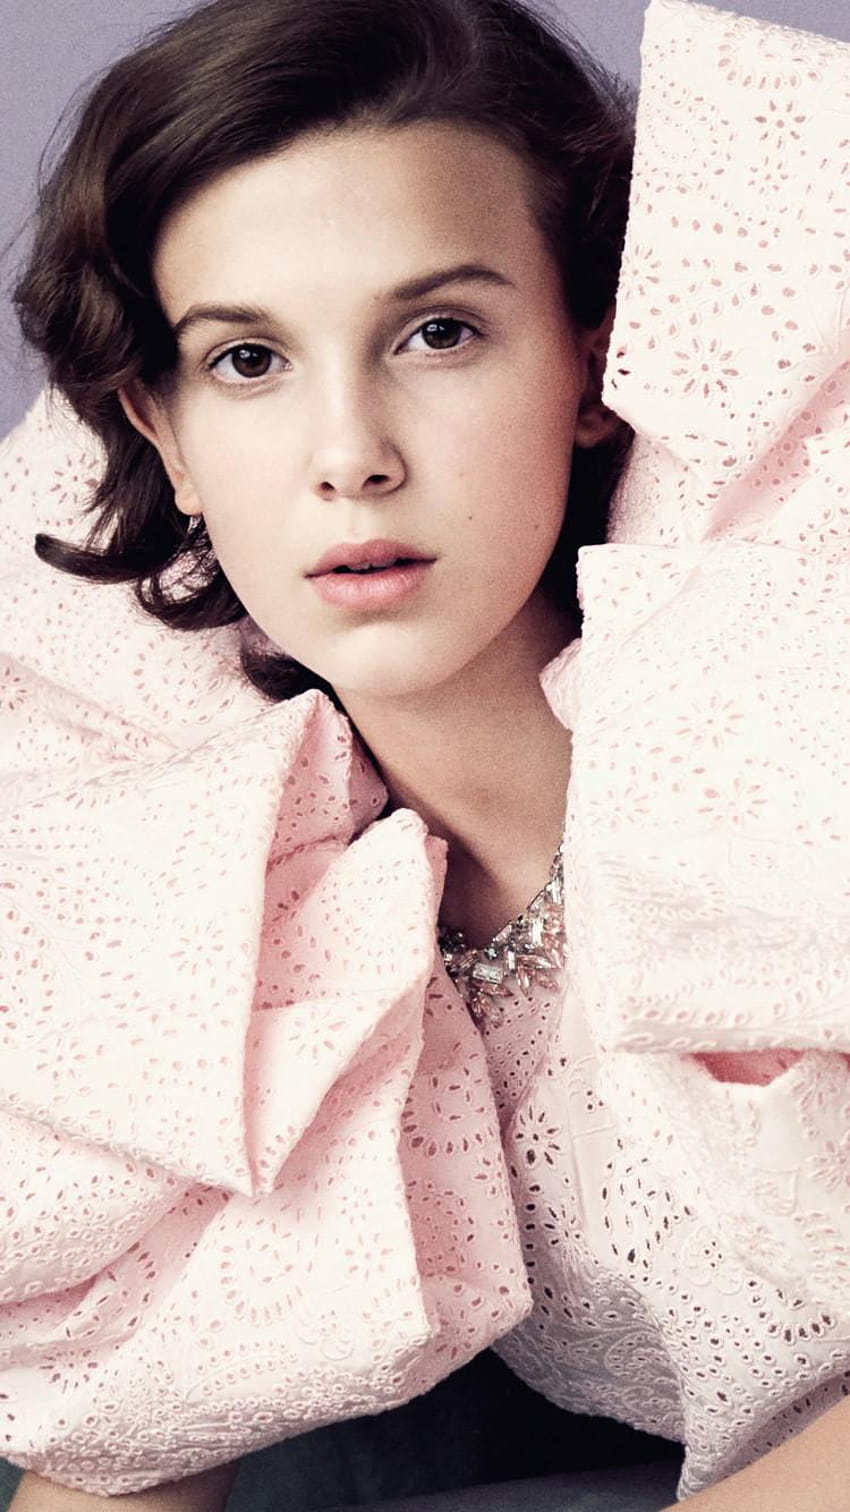 750x1334 Millie Bobby Brown Vogue 2018 iPhone 6, iPhone 6S, millie bobby brown iphone HD telefon duvar kağıdı